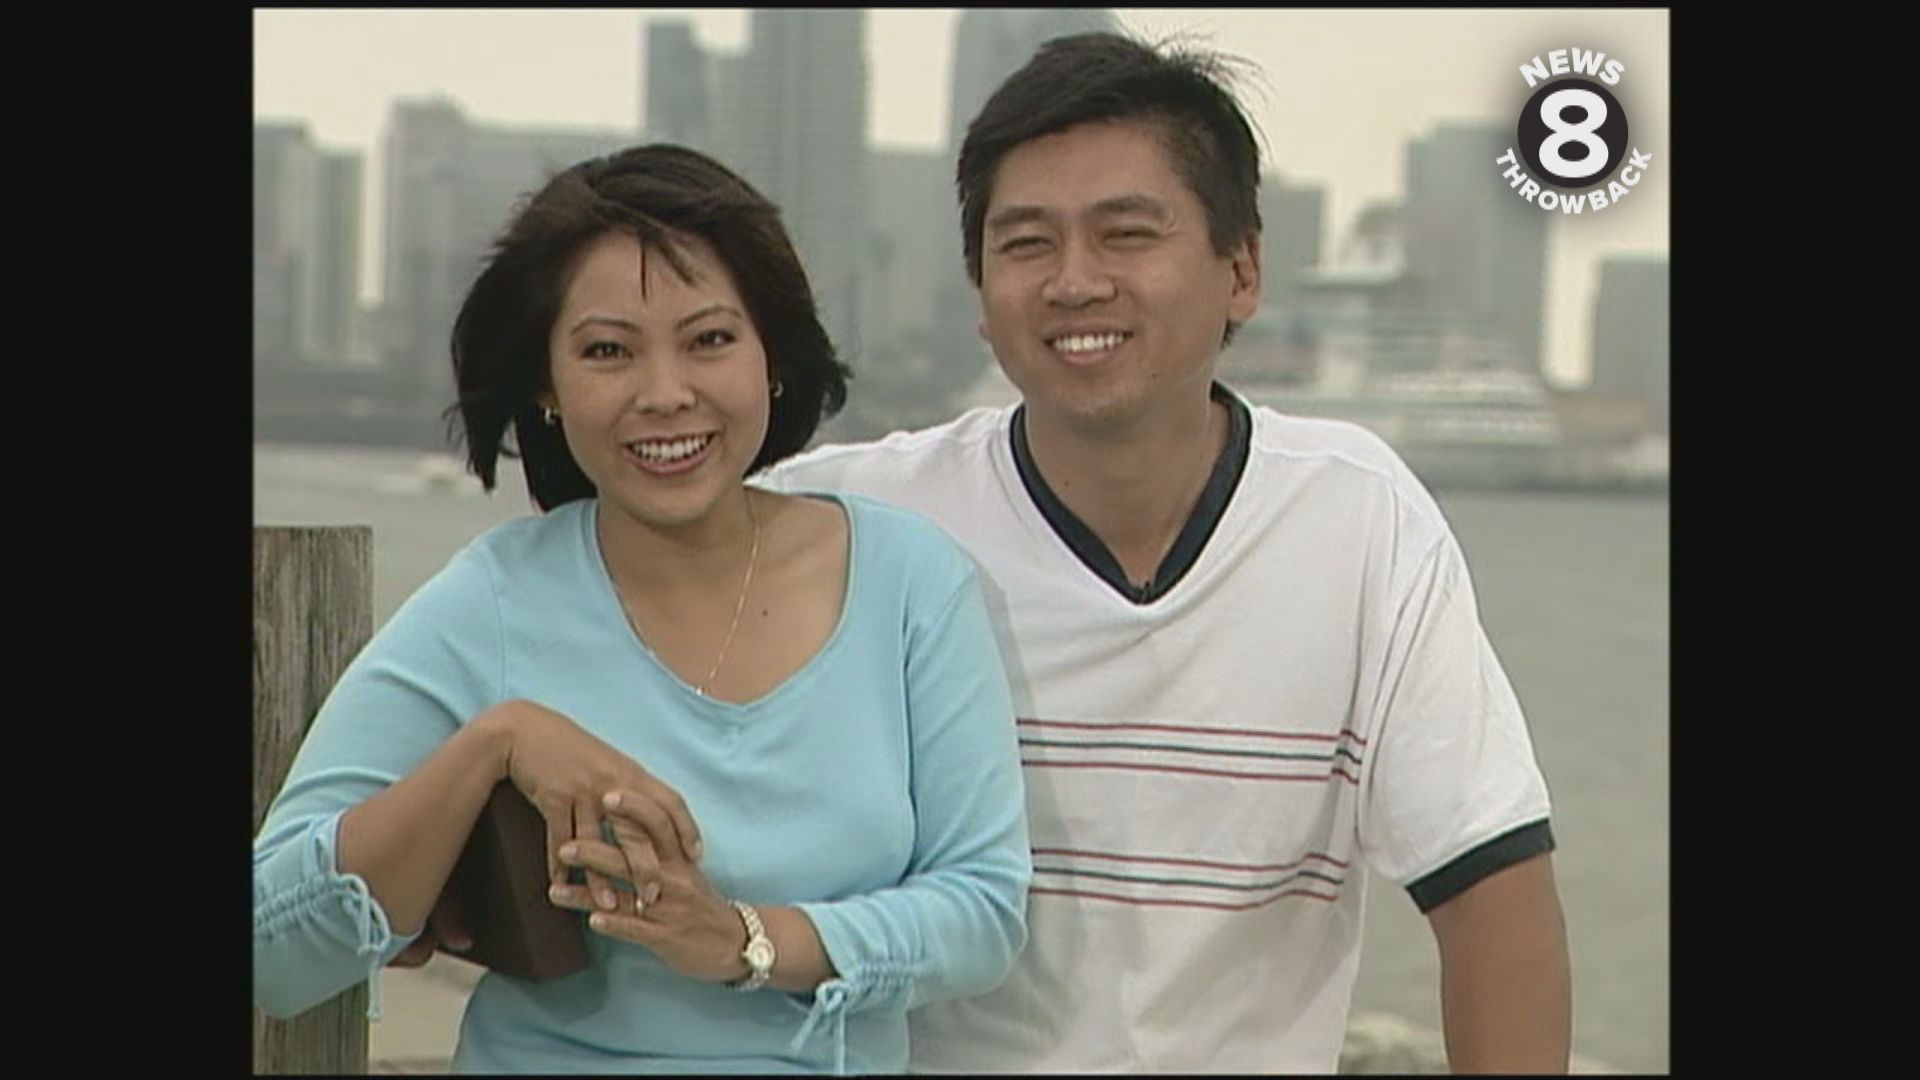 CBS 8's Marcella Lee in 2004 